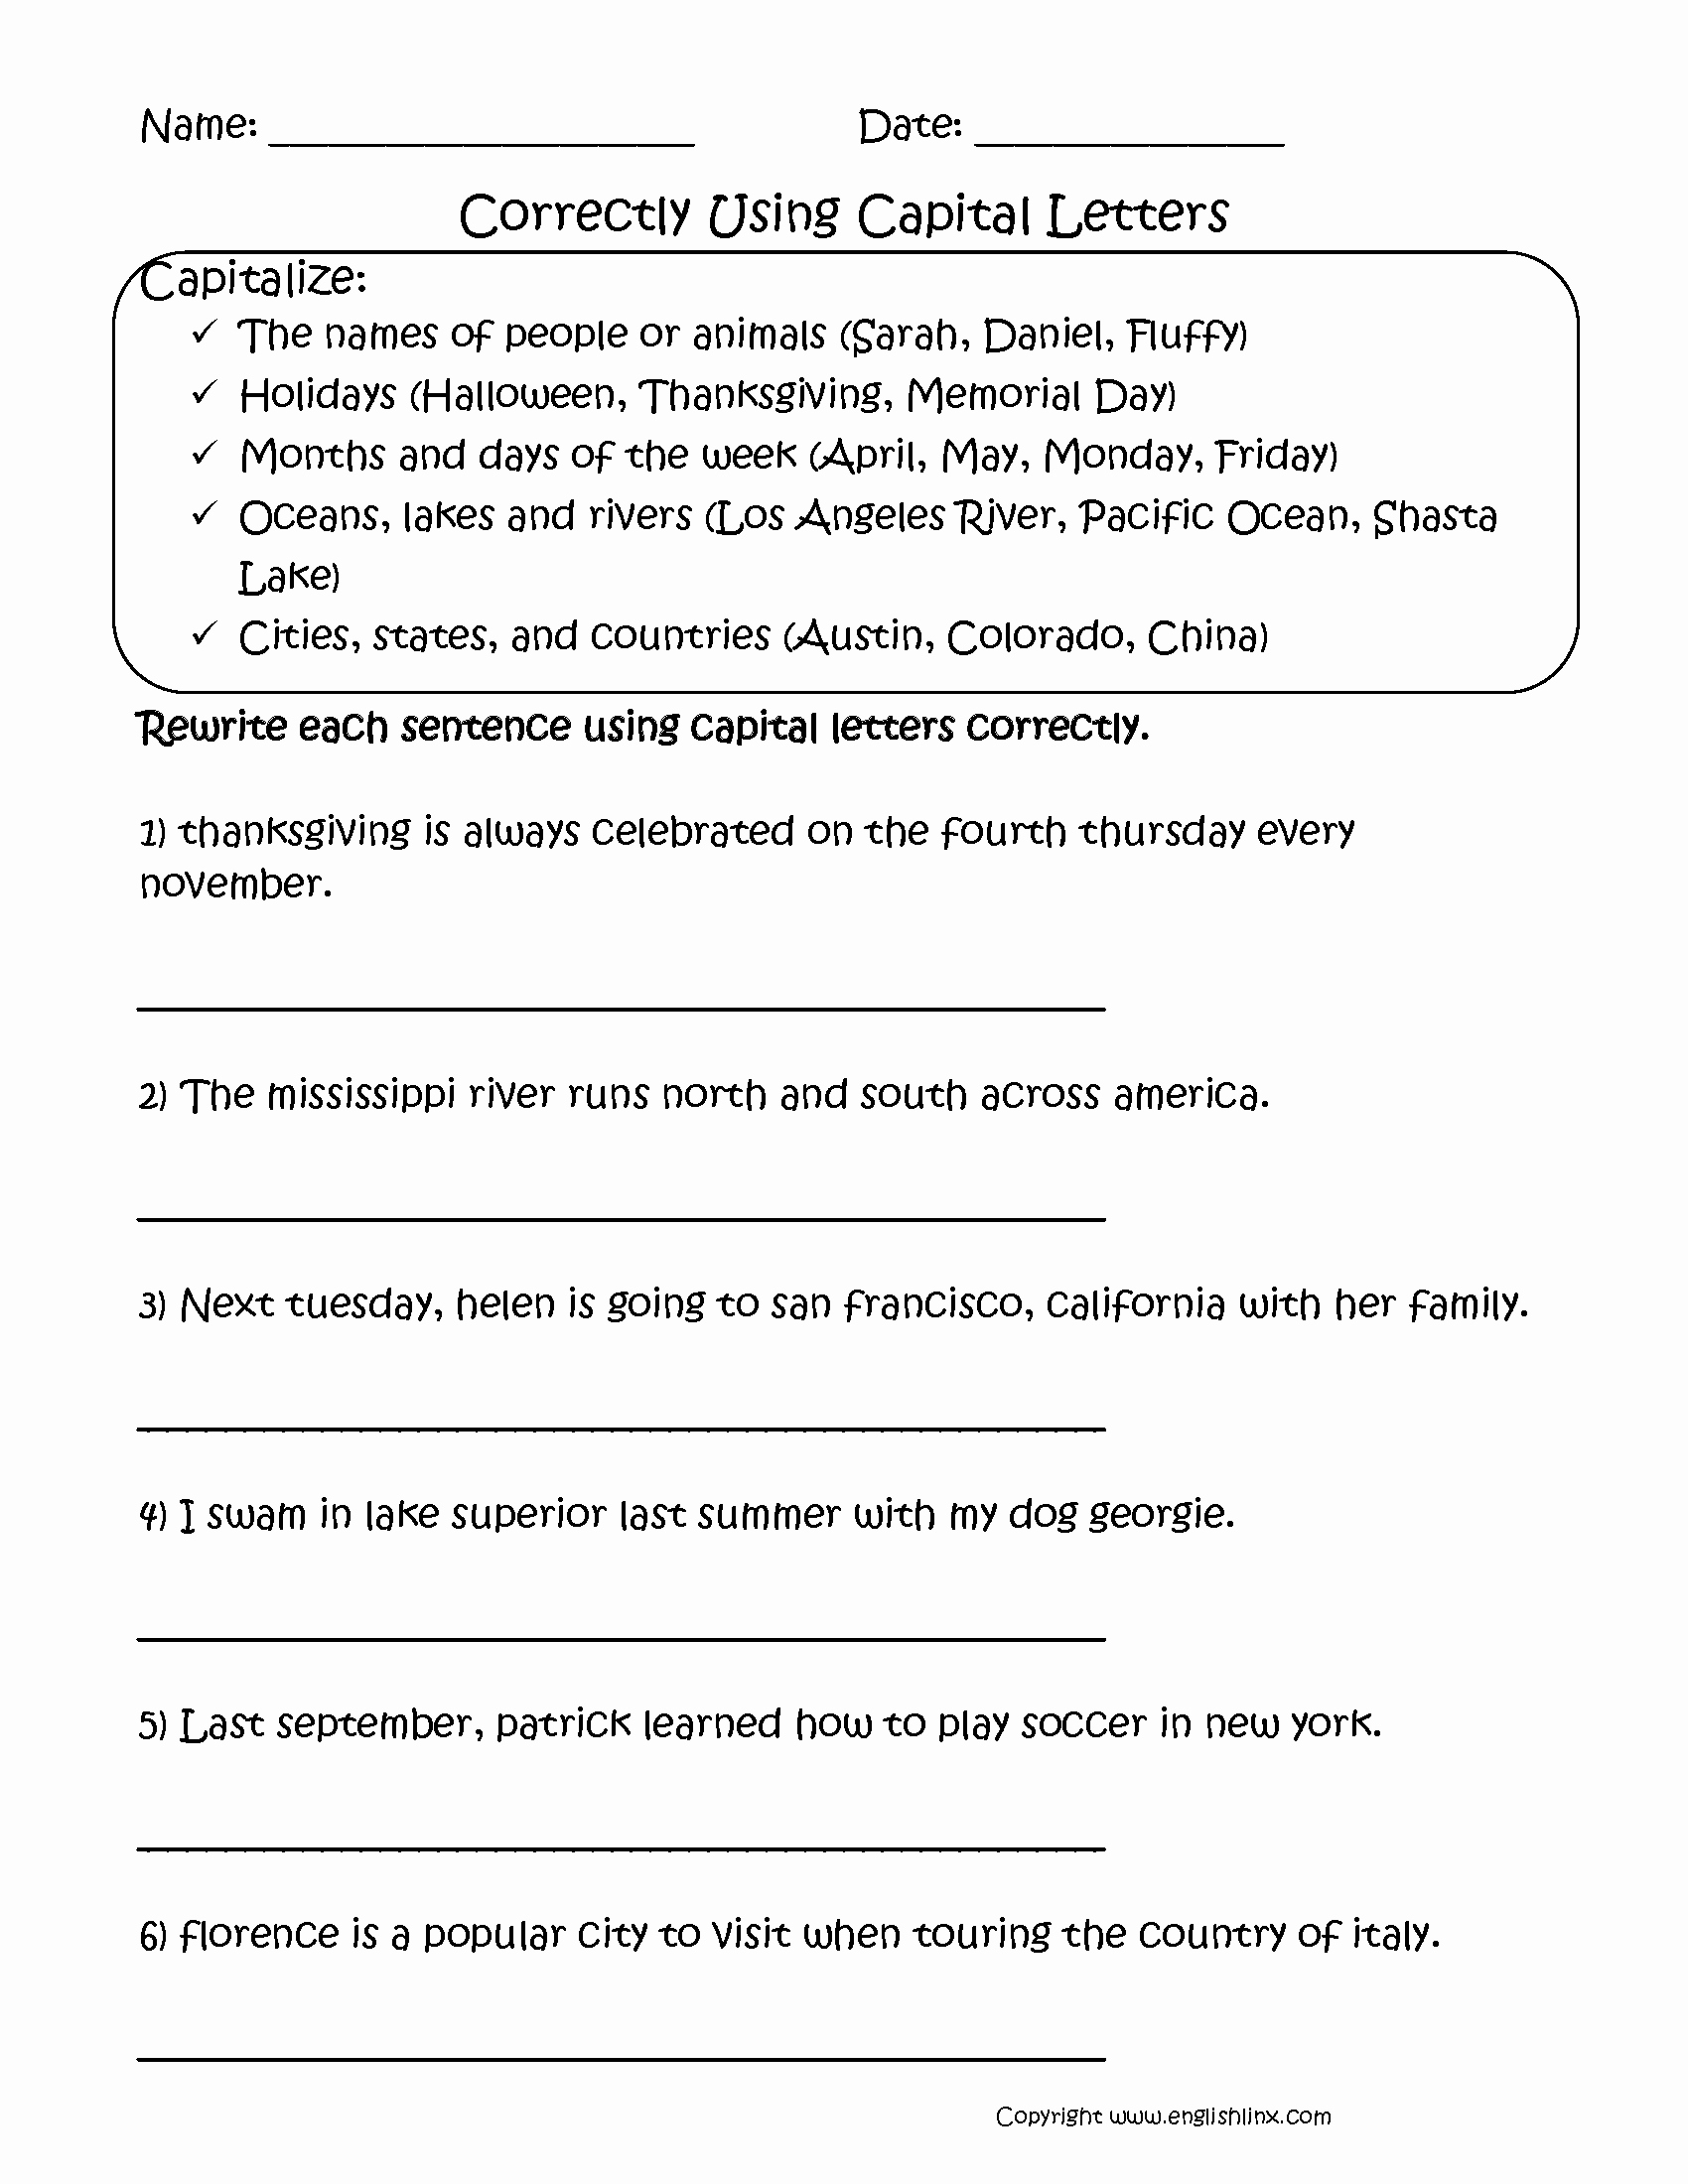 Capitalization Worksheets for 2nd Grade Awesome Capitalization Worksheets 2nd Grade — Excelguider